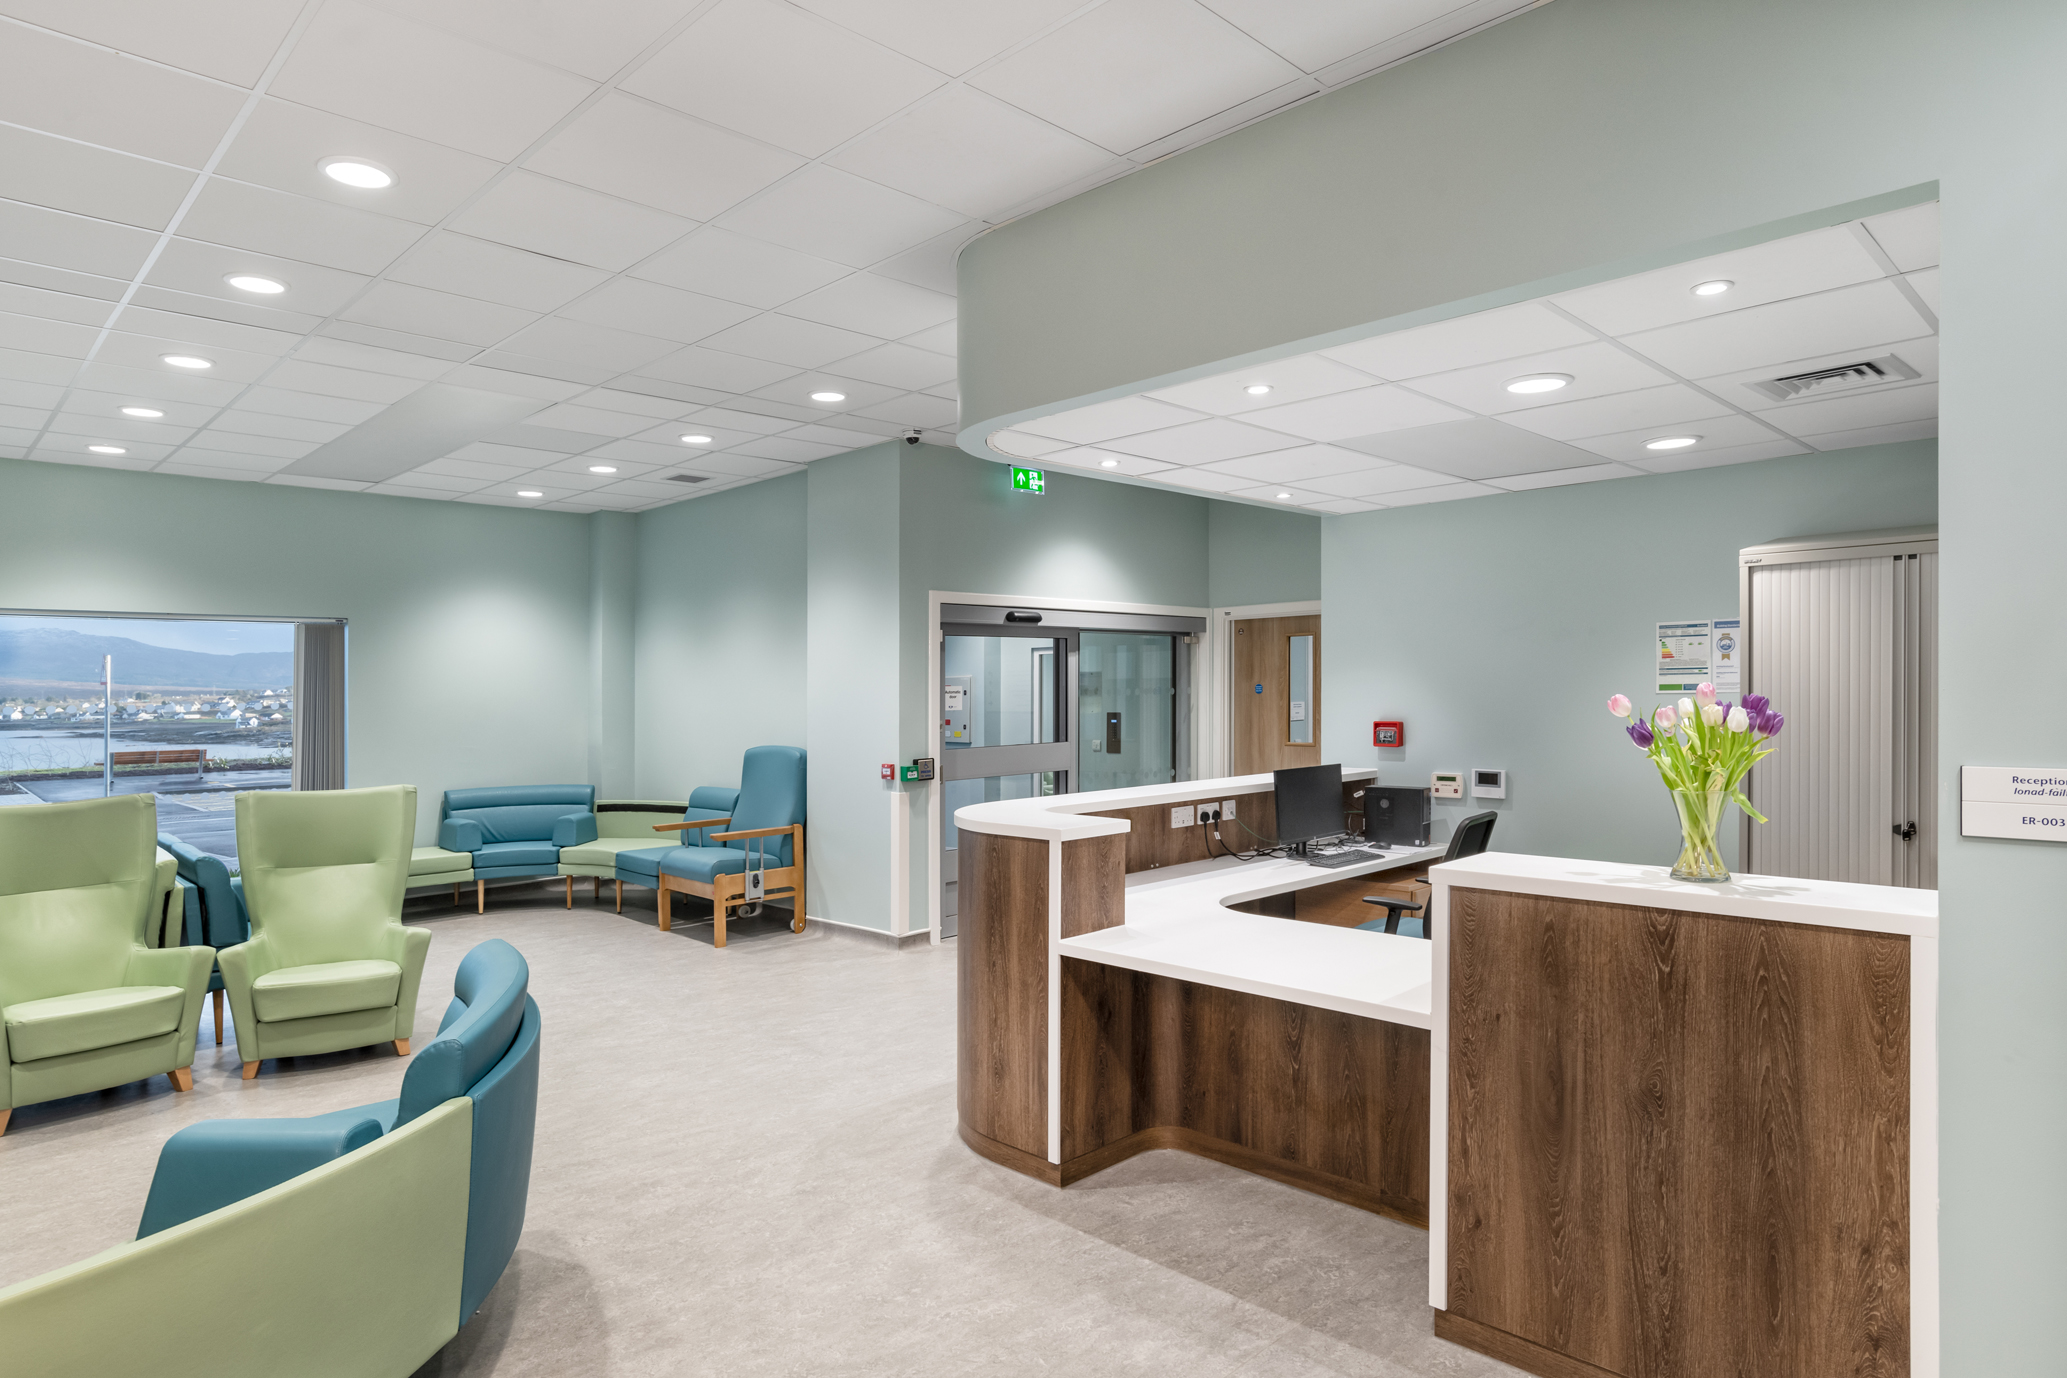 Deanestor fits out second community hospital in the Highlands